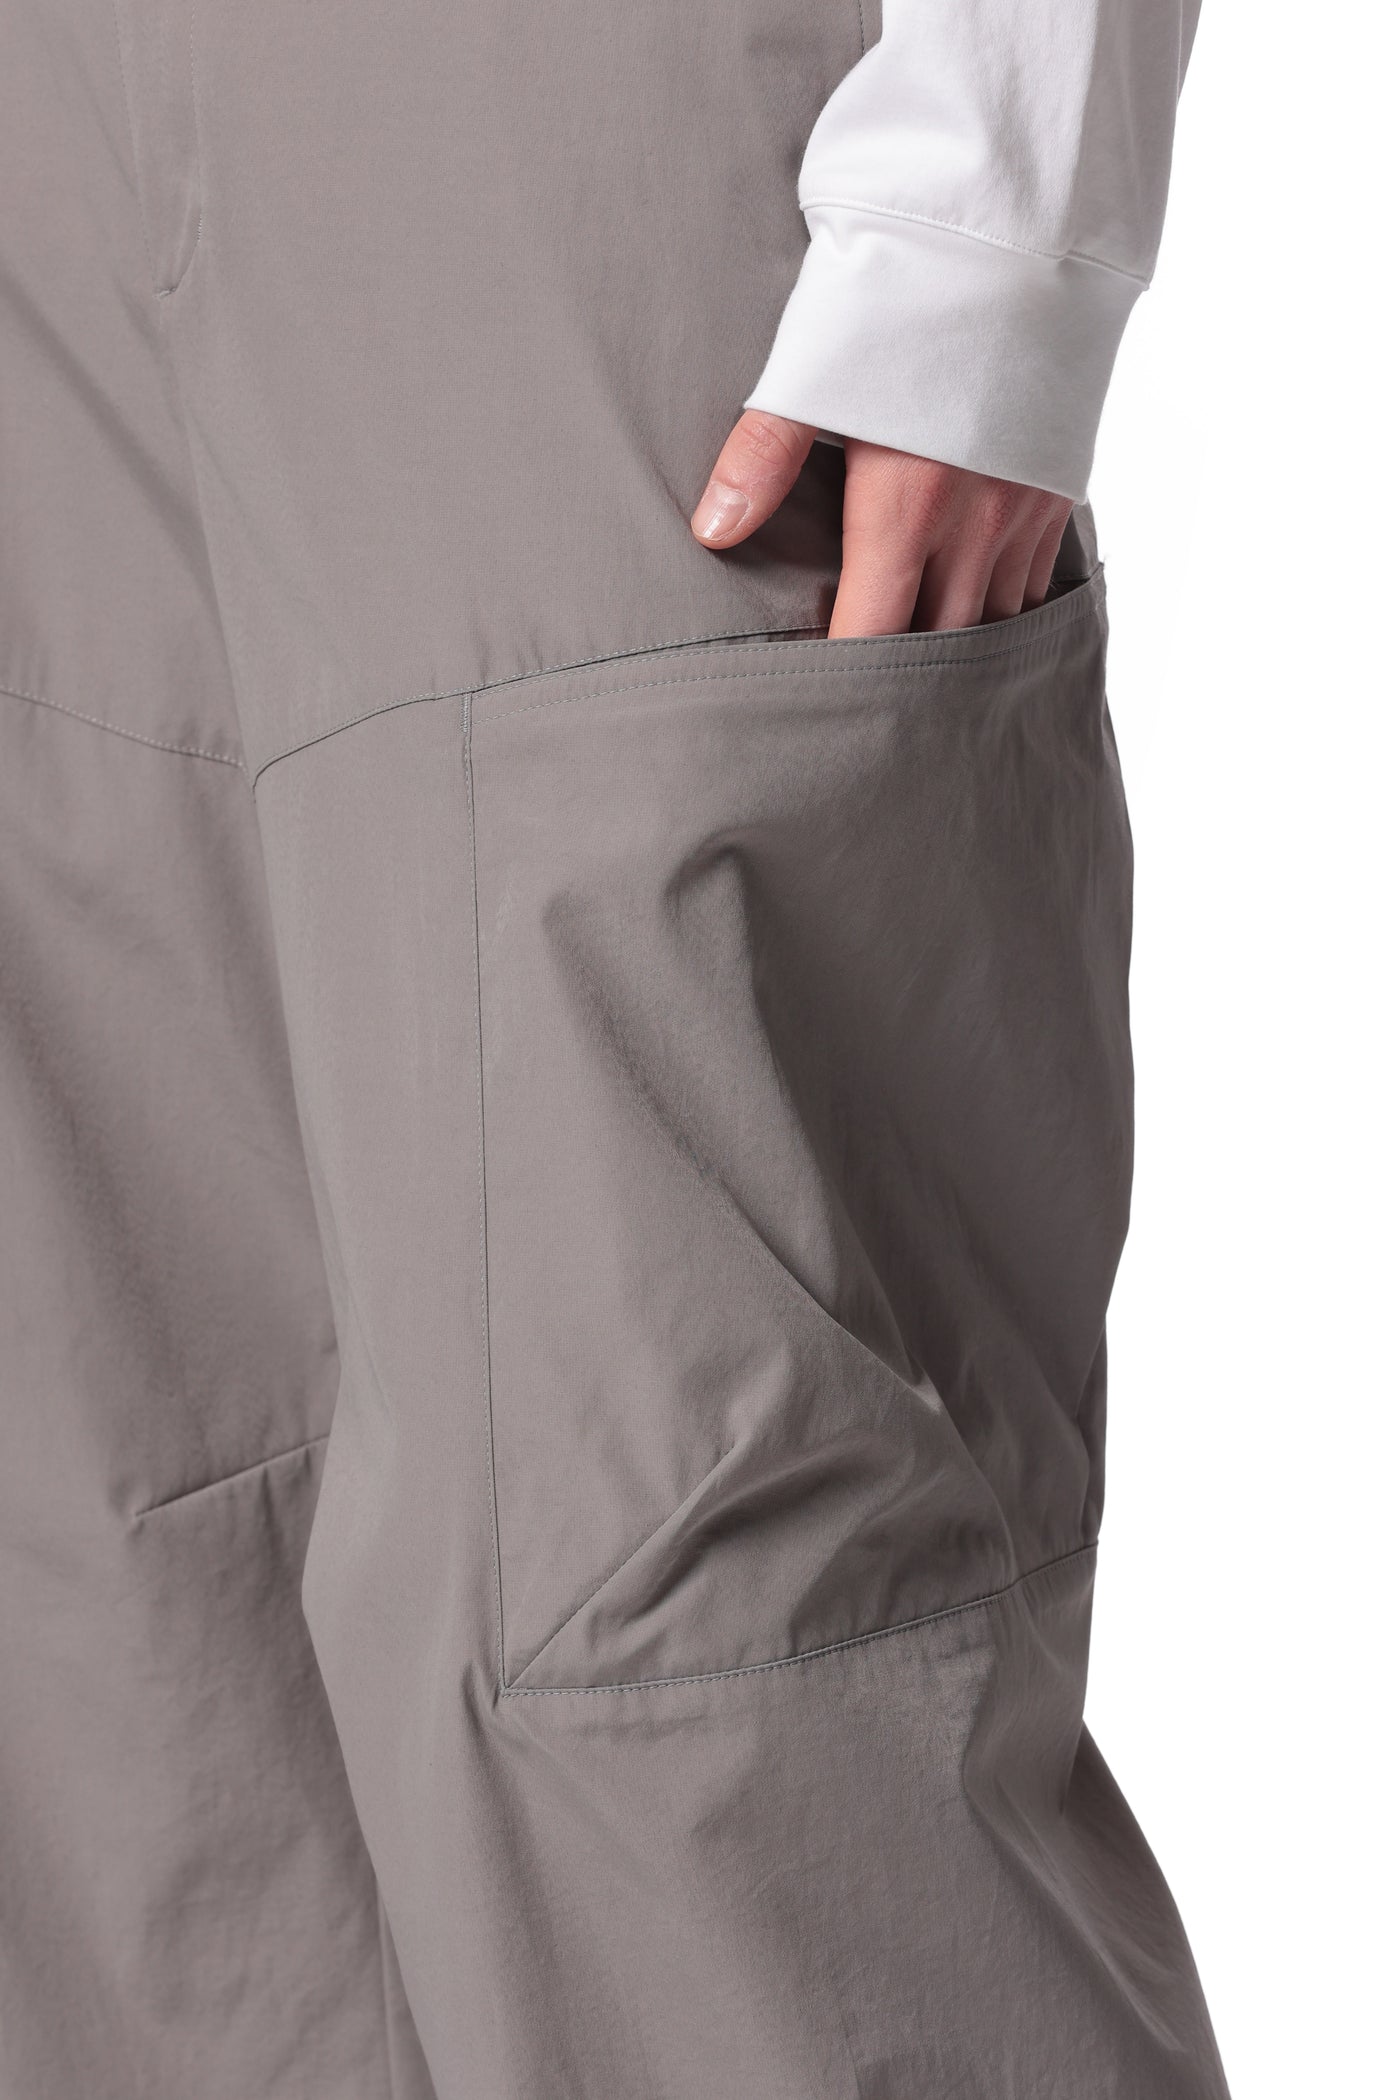 Released in February AP41-001 Cotton/nylon weather cloth wide cargo pants